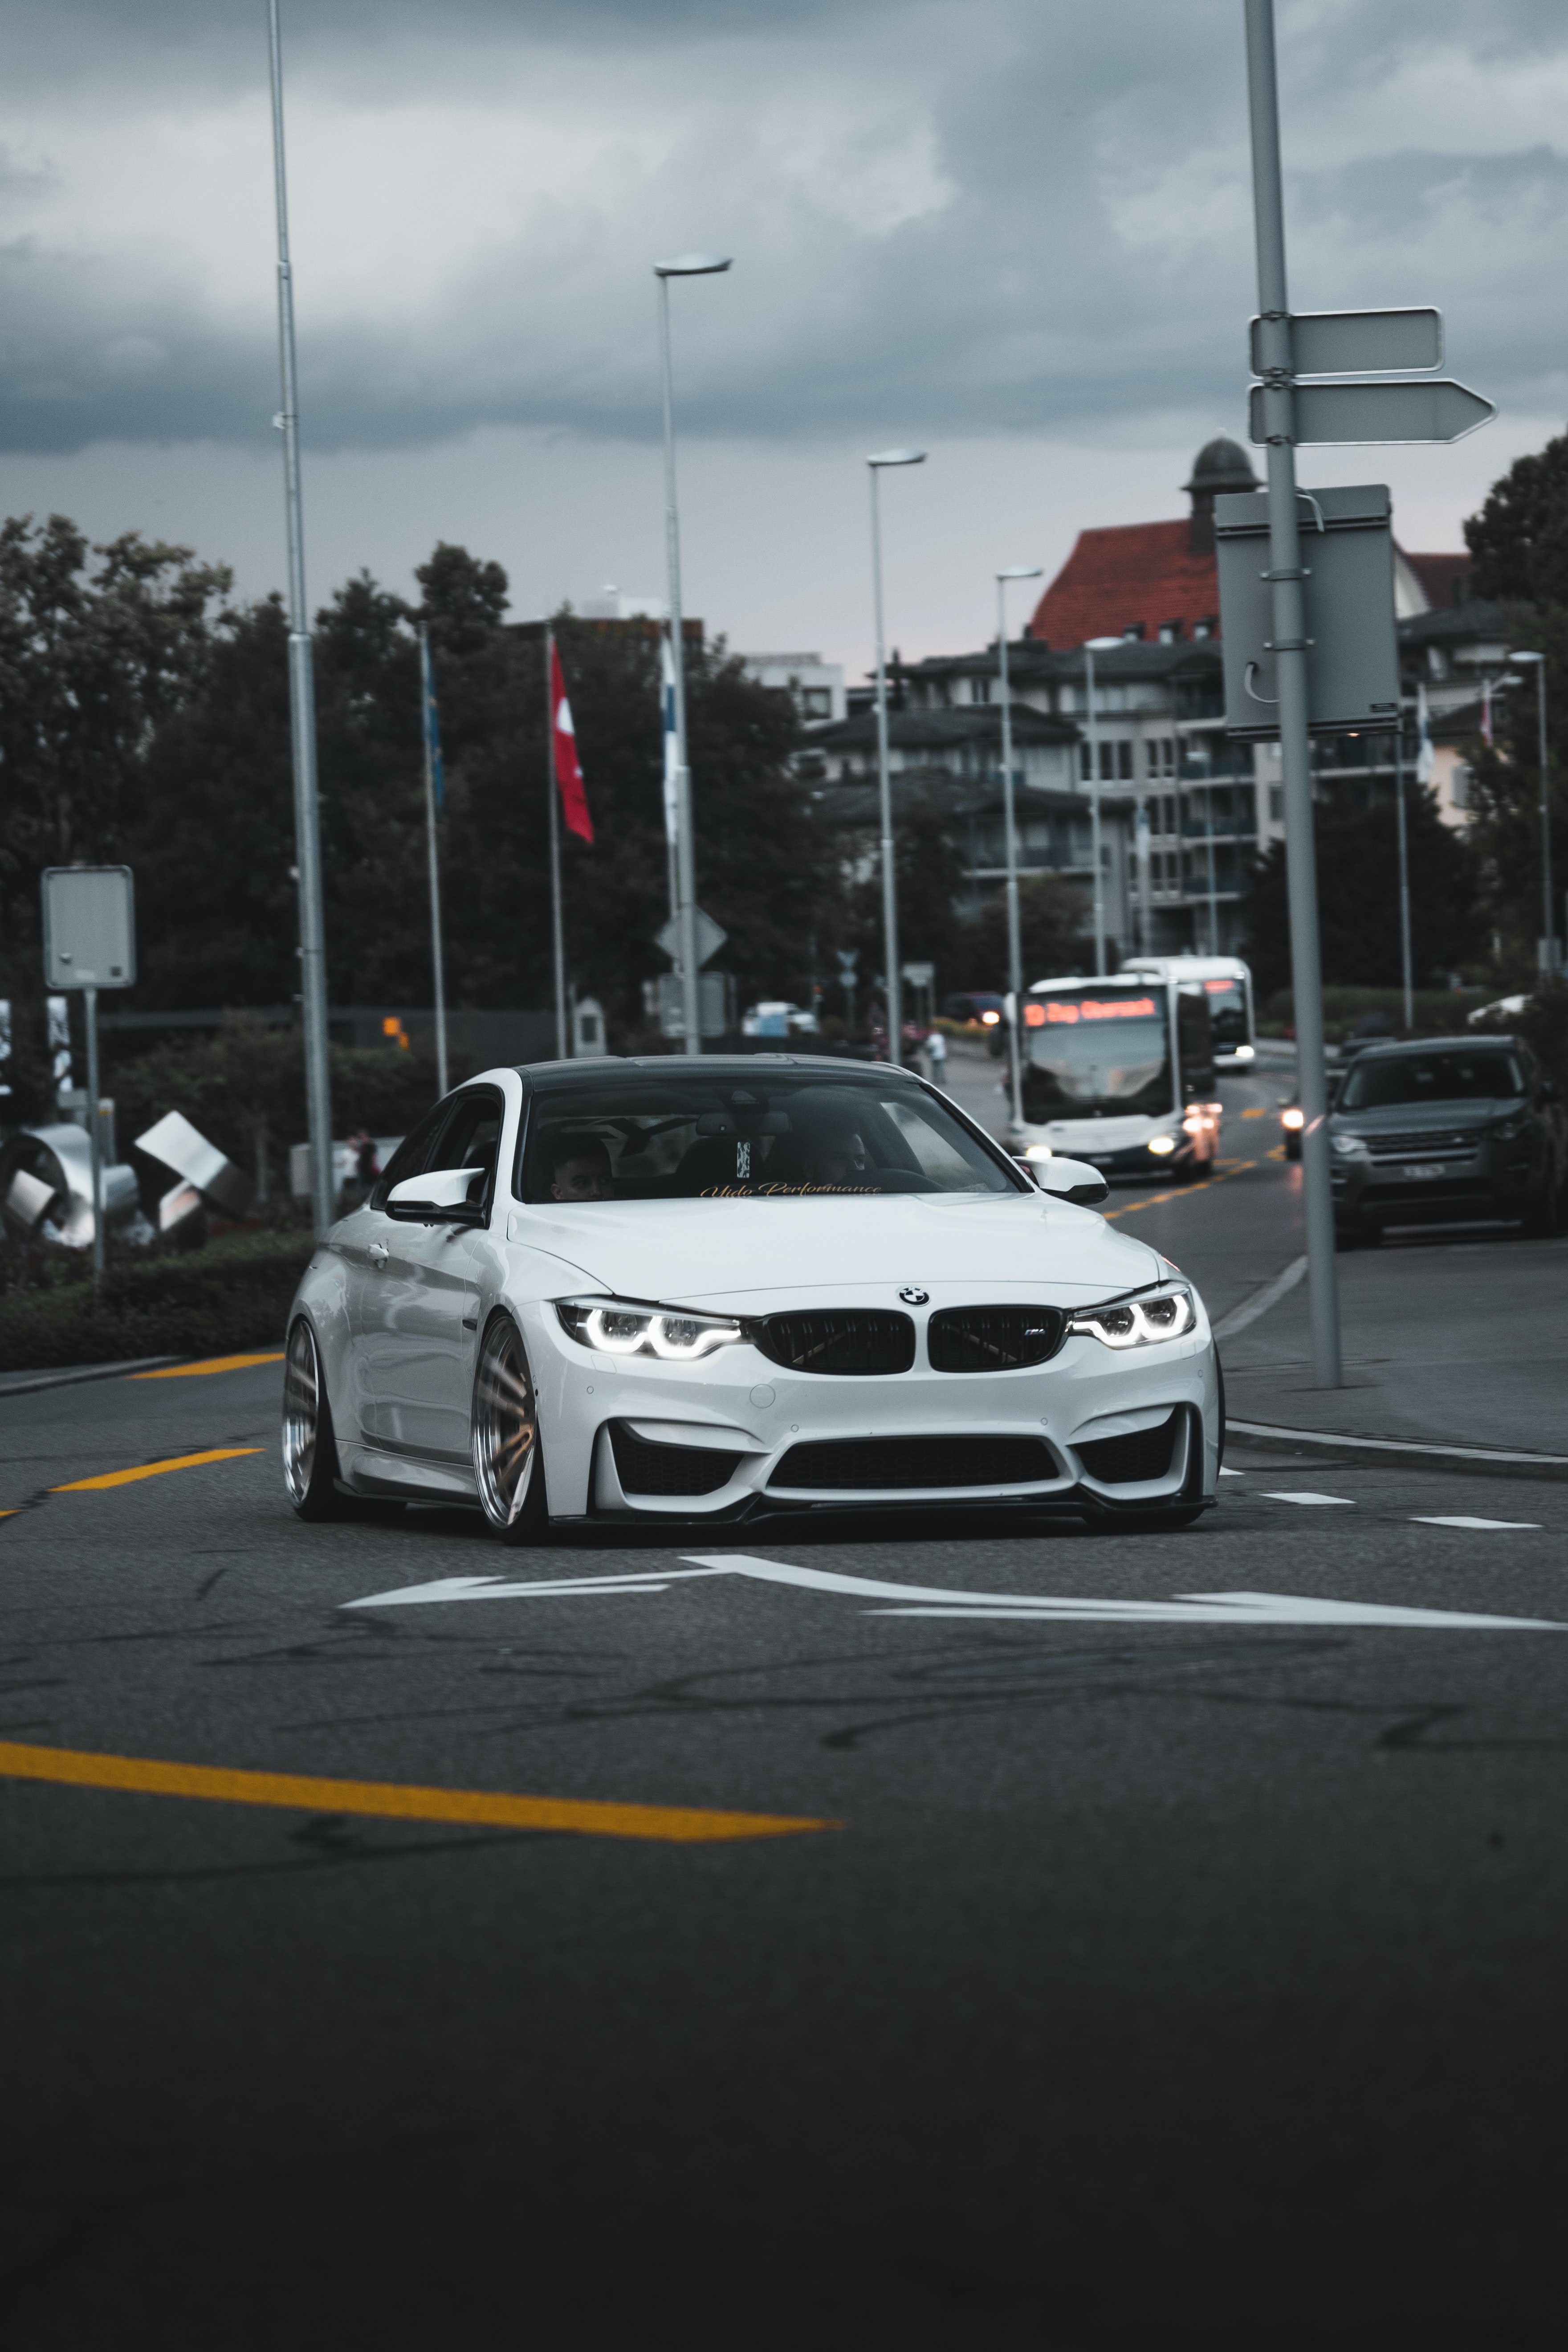 android bmw, cars, sports car, front view, sports, road, car, bmw 3 series m